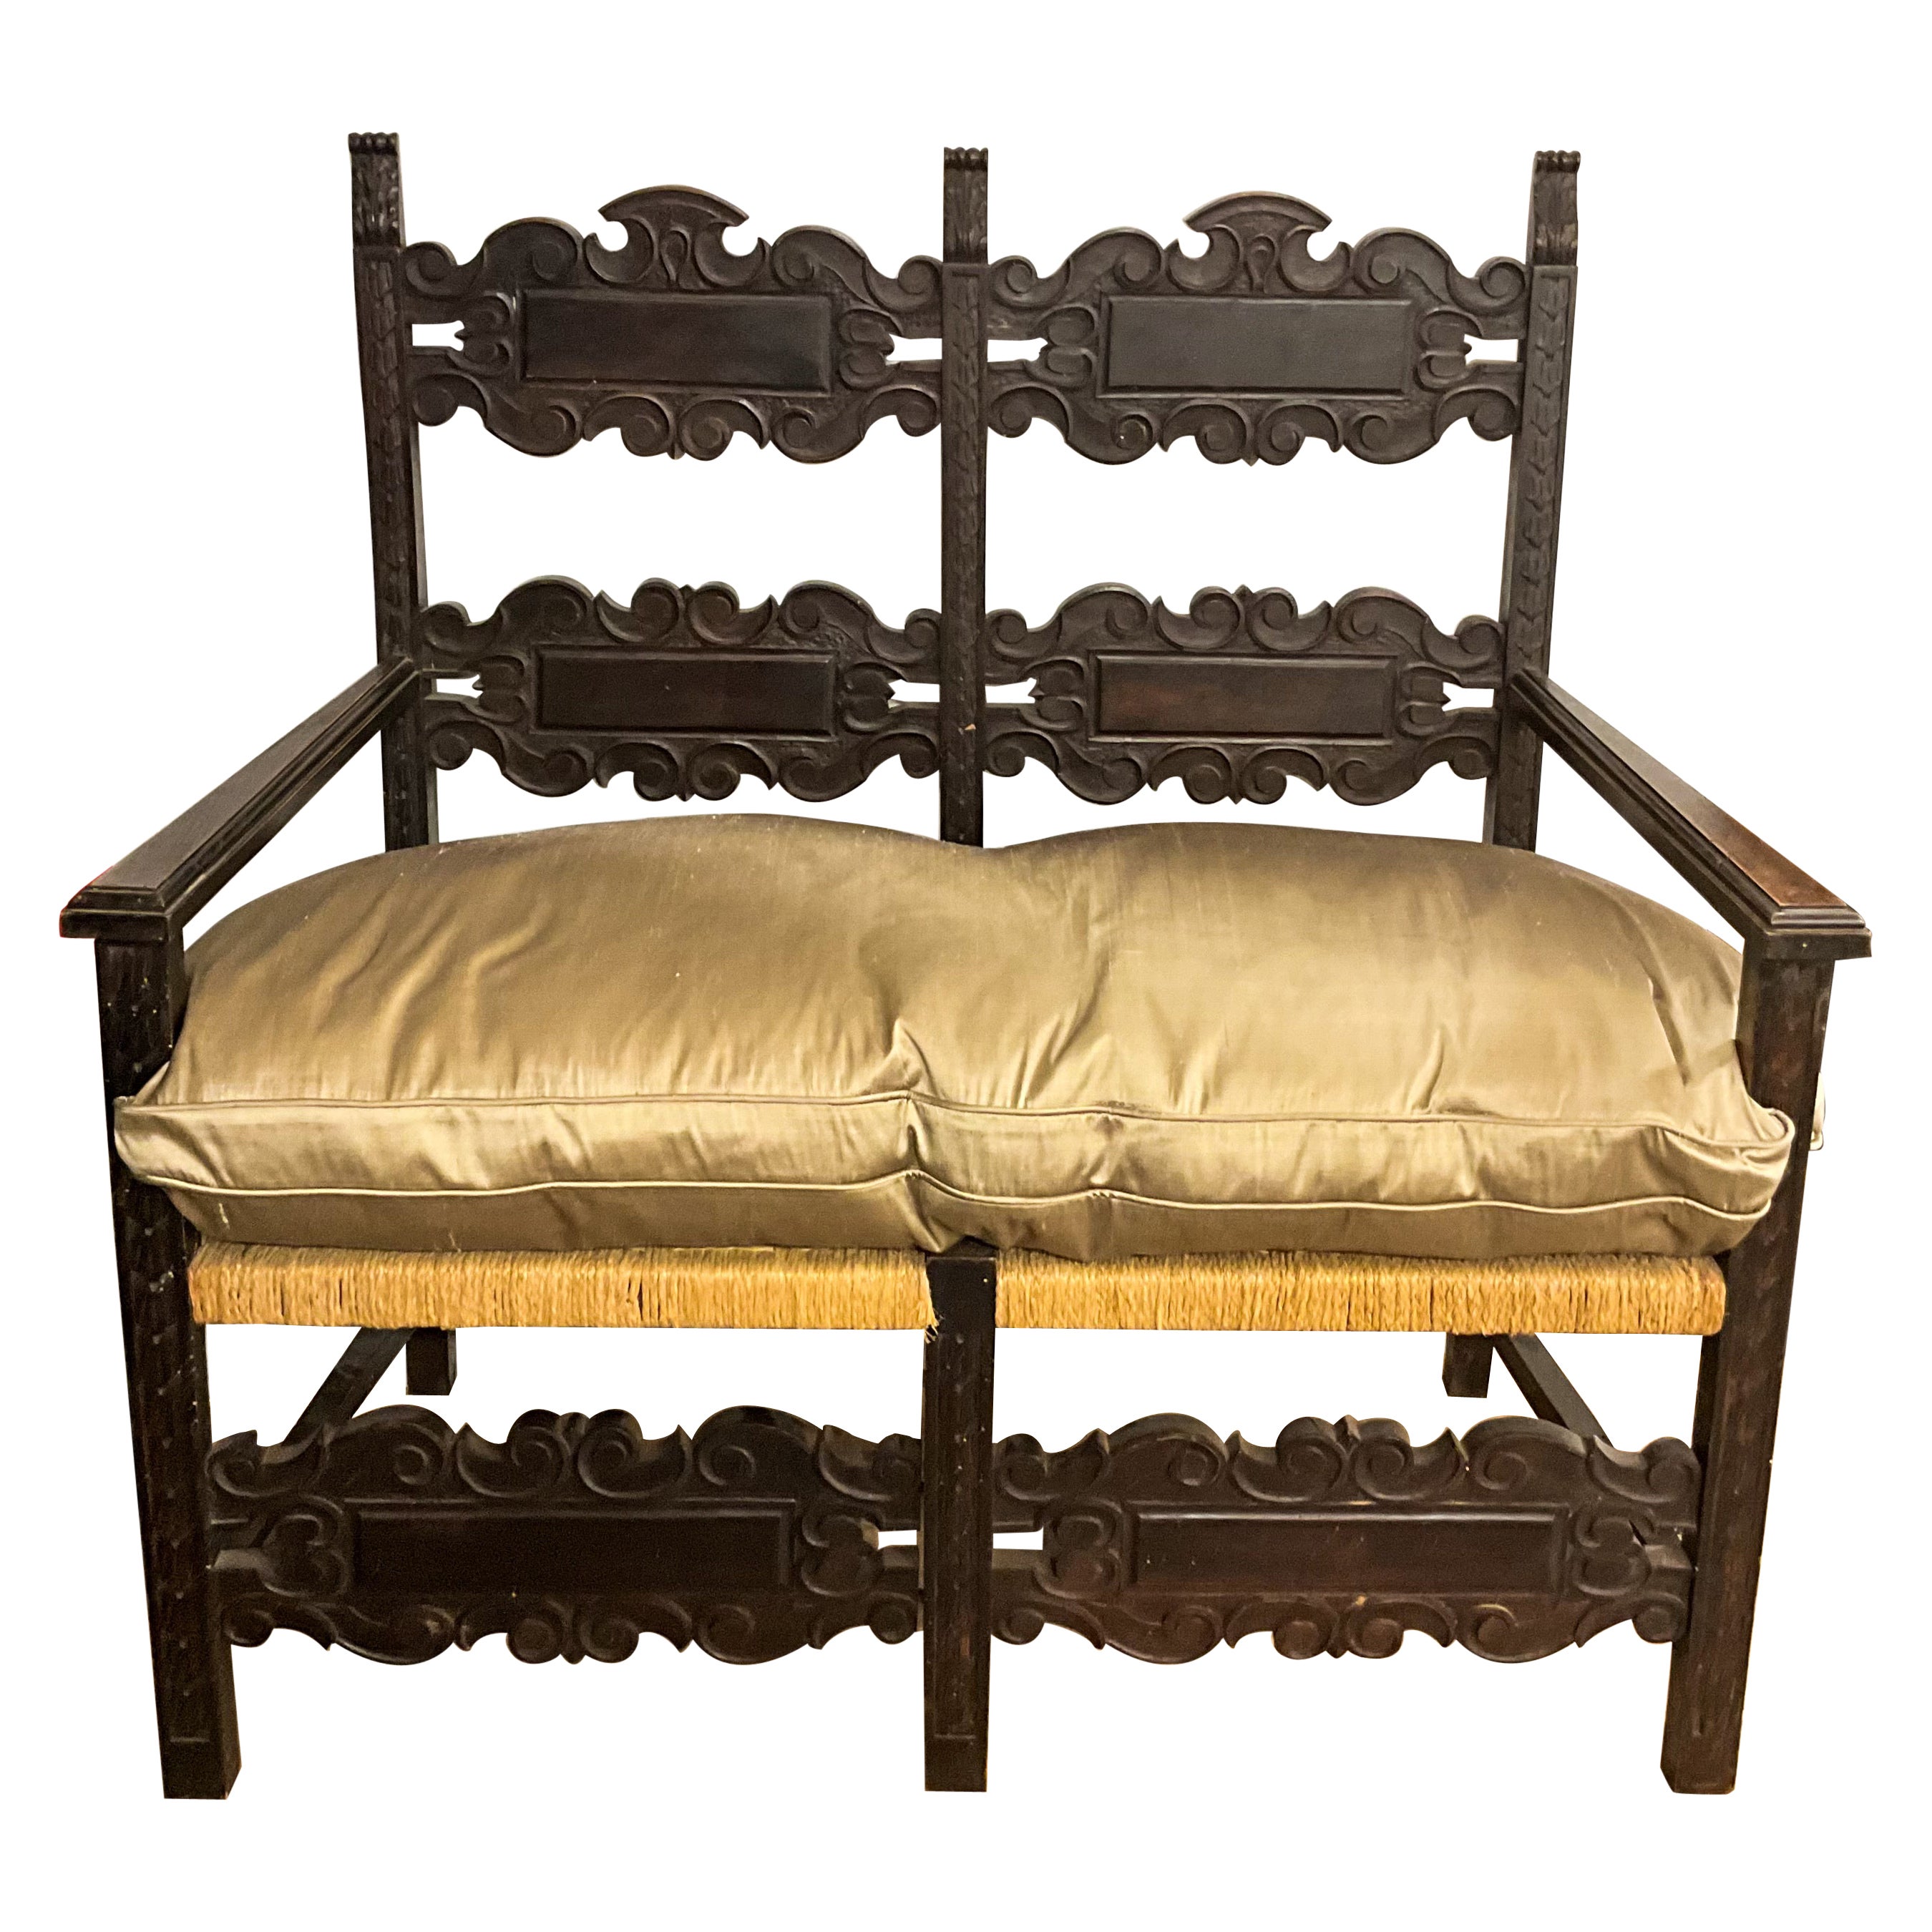 19th-C. French Ebonized Carved Oak Settee With Rush Seat & Silk Down Cushion